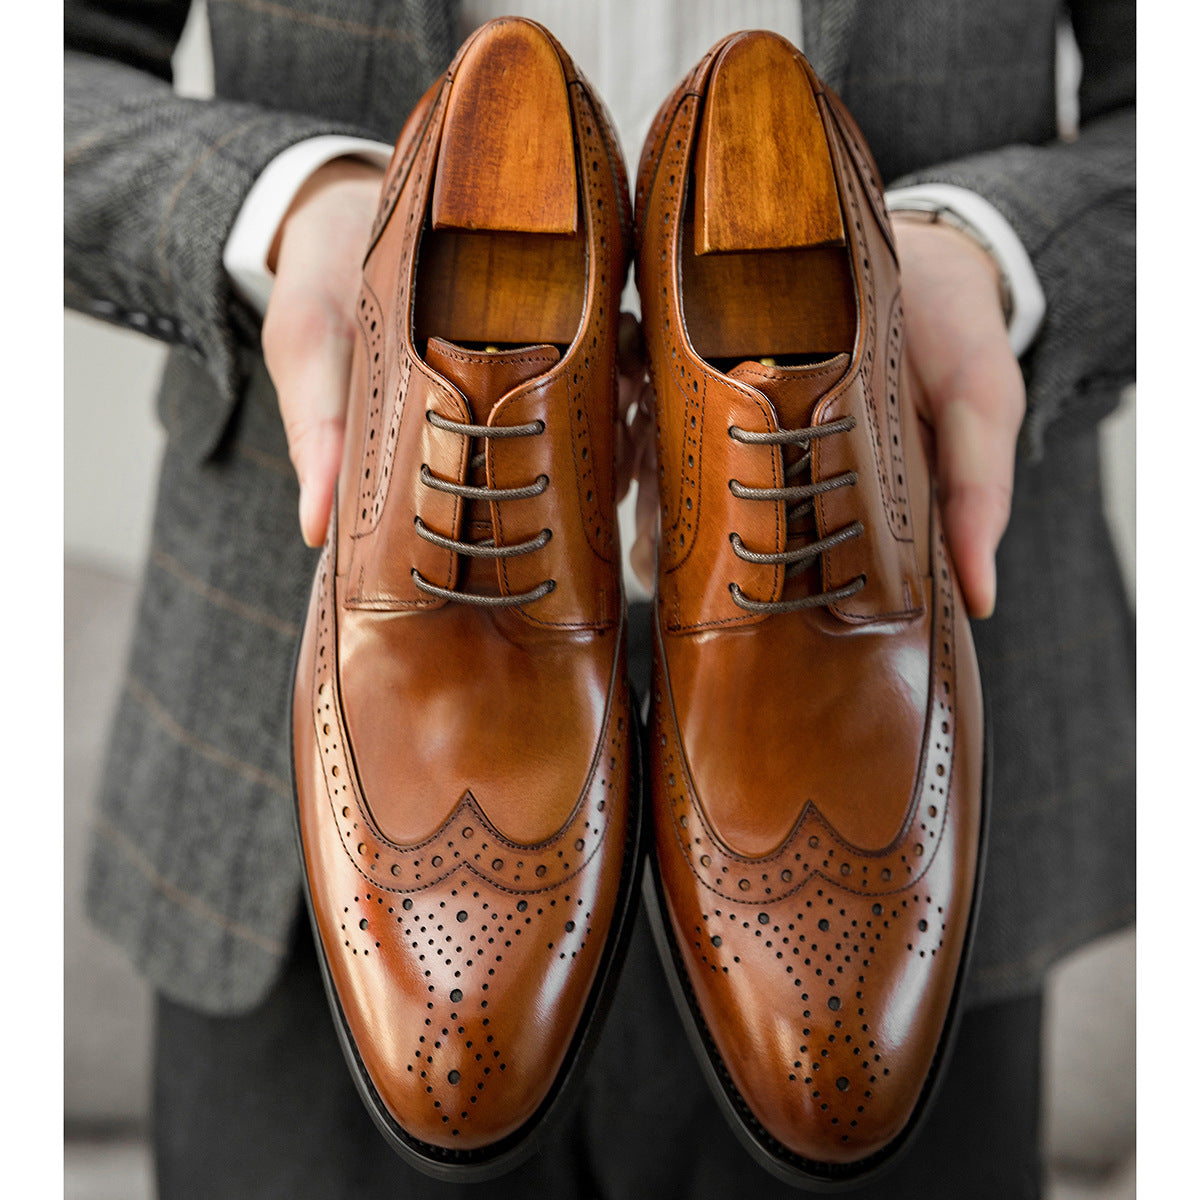 Classic Elegant Men's Brogue British Carved Leather Shoes